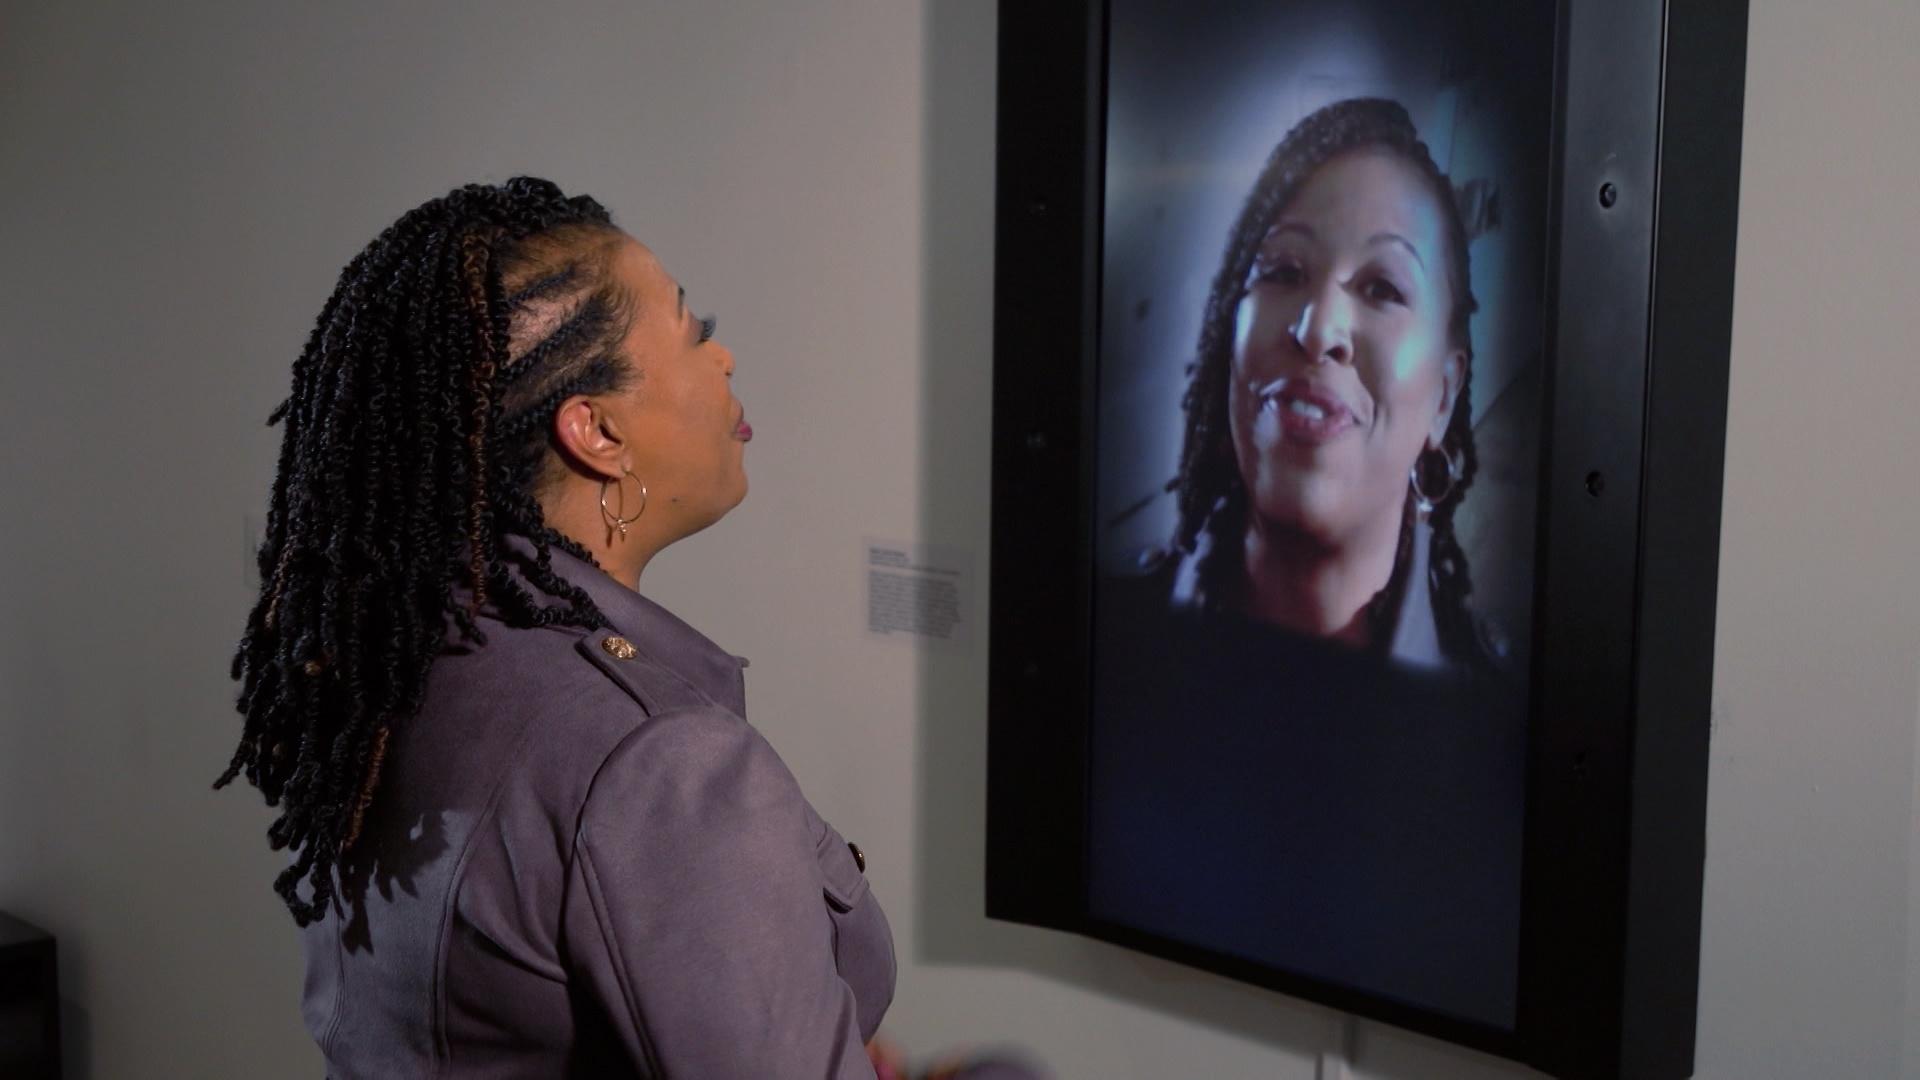 Host of NC Weekend, Deborah Holt Noel, looks at herself in a screen that's showing her through a camera.